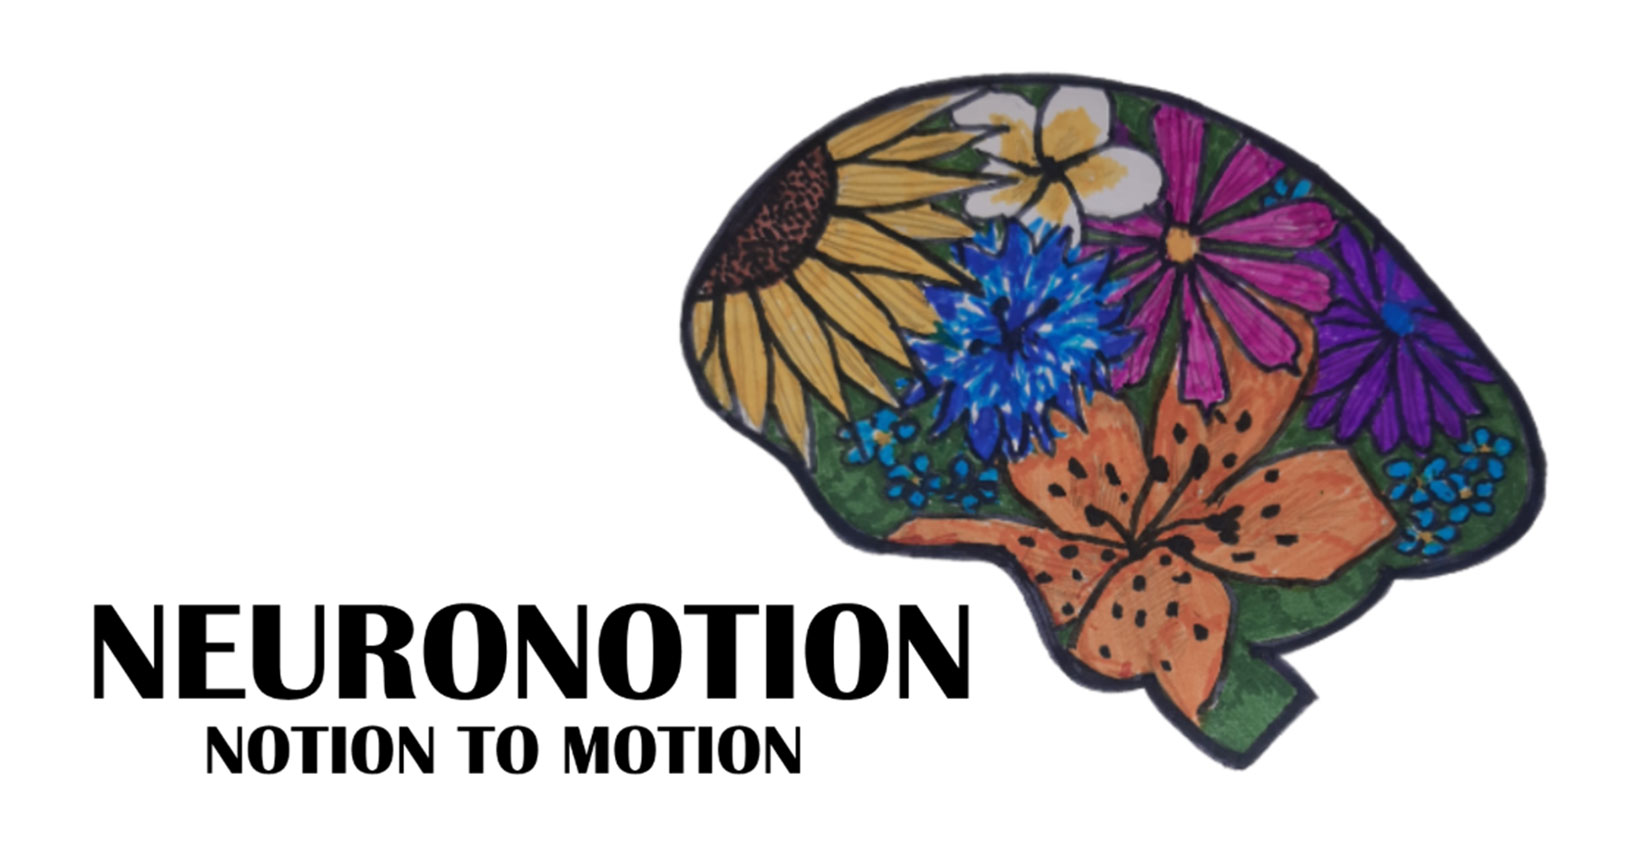 NEURONOTION

NOTION TO MOTION